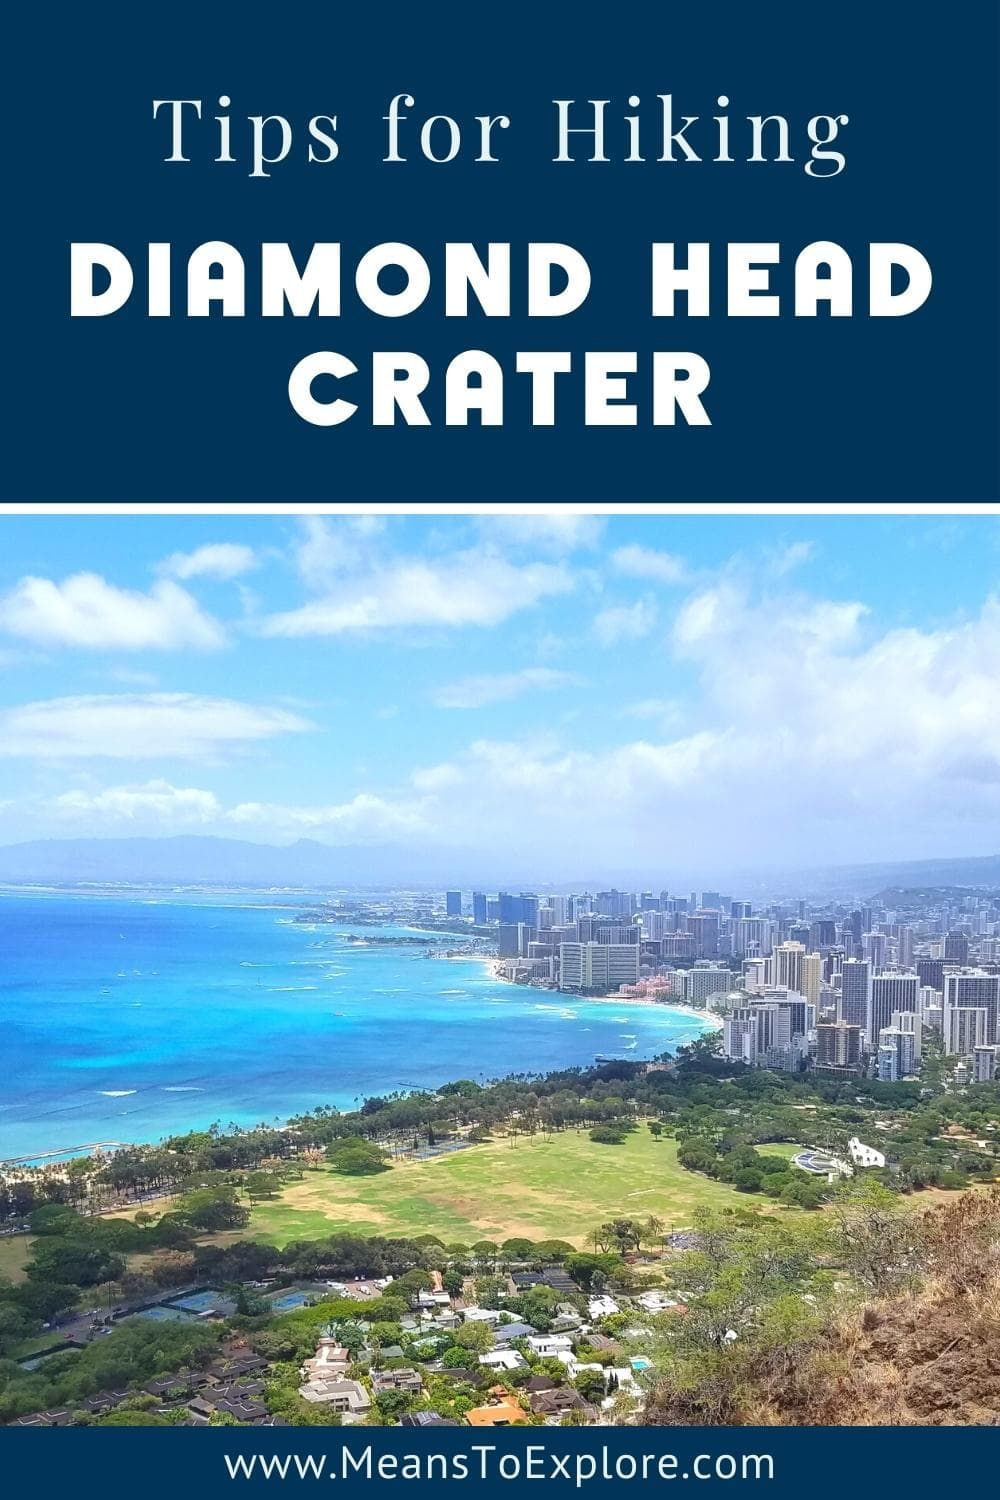 The Epic Diamond Head Crater Hike on Oahu: Everything You Need to Know!